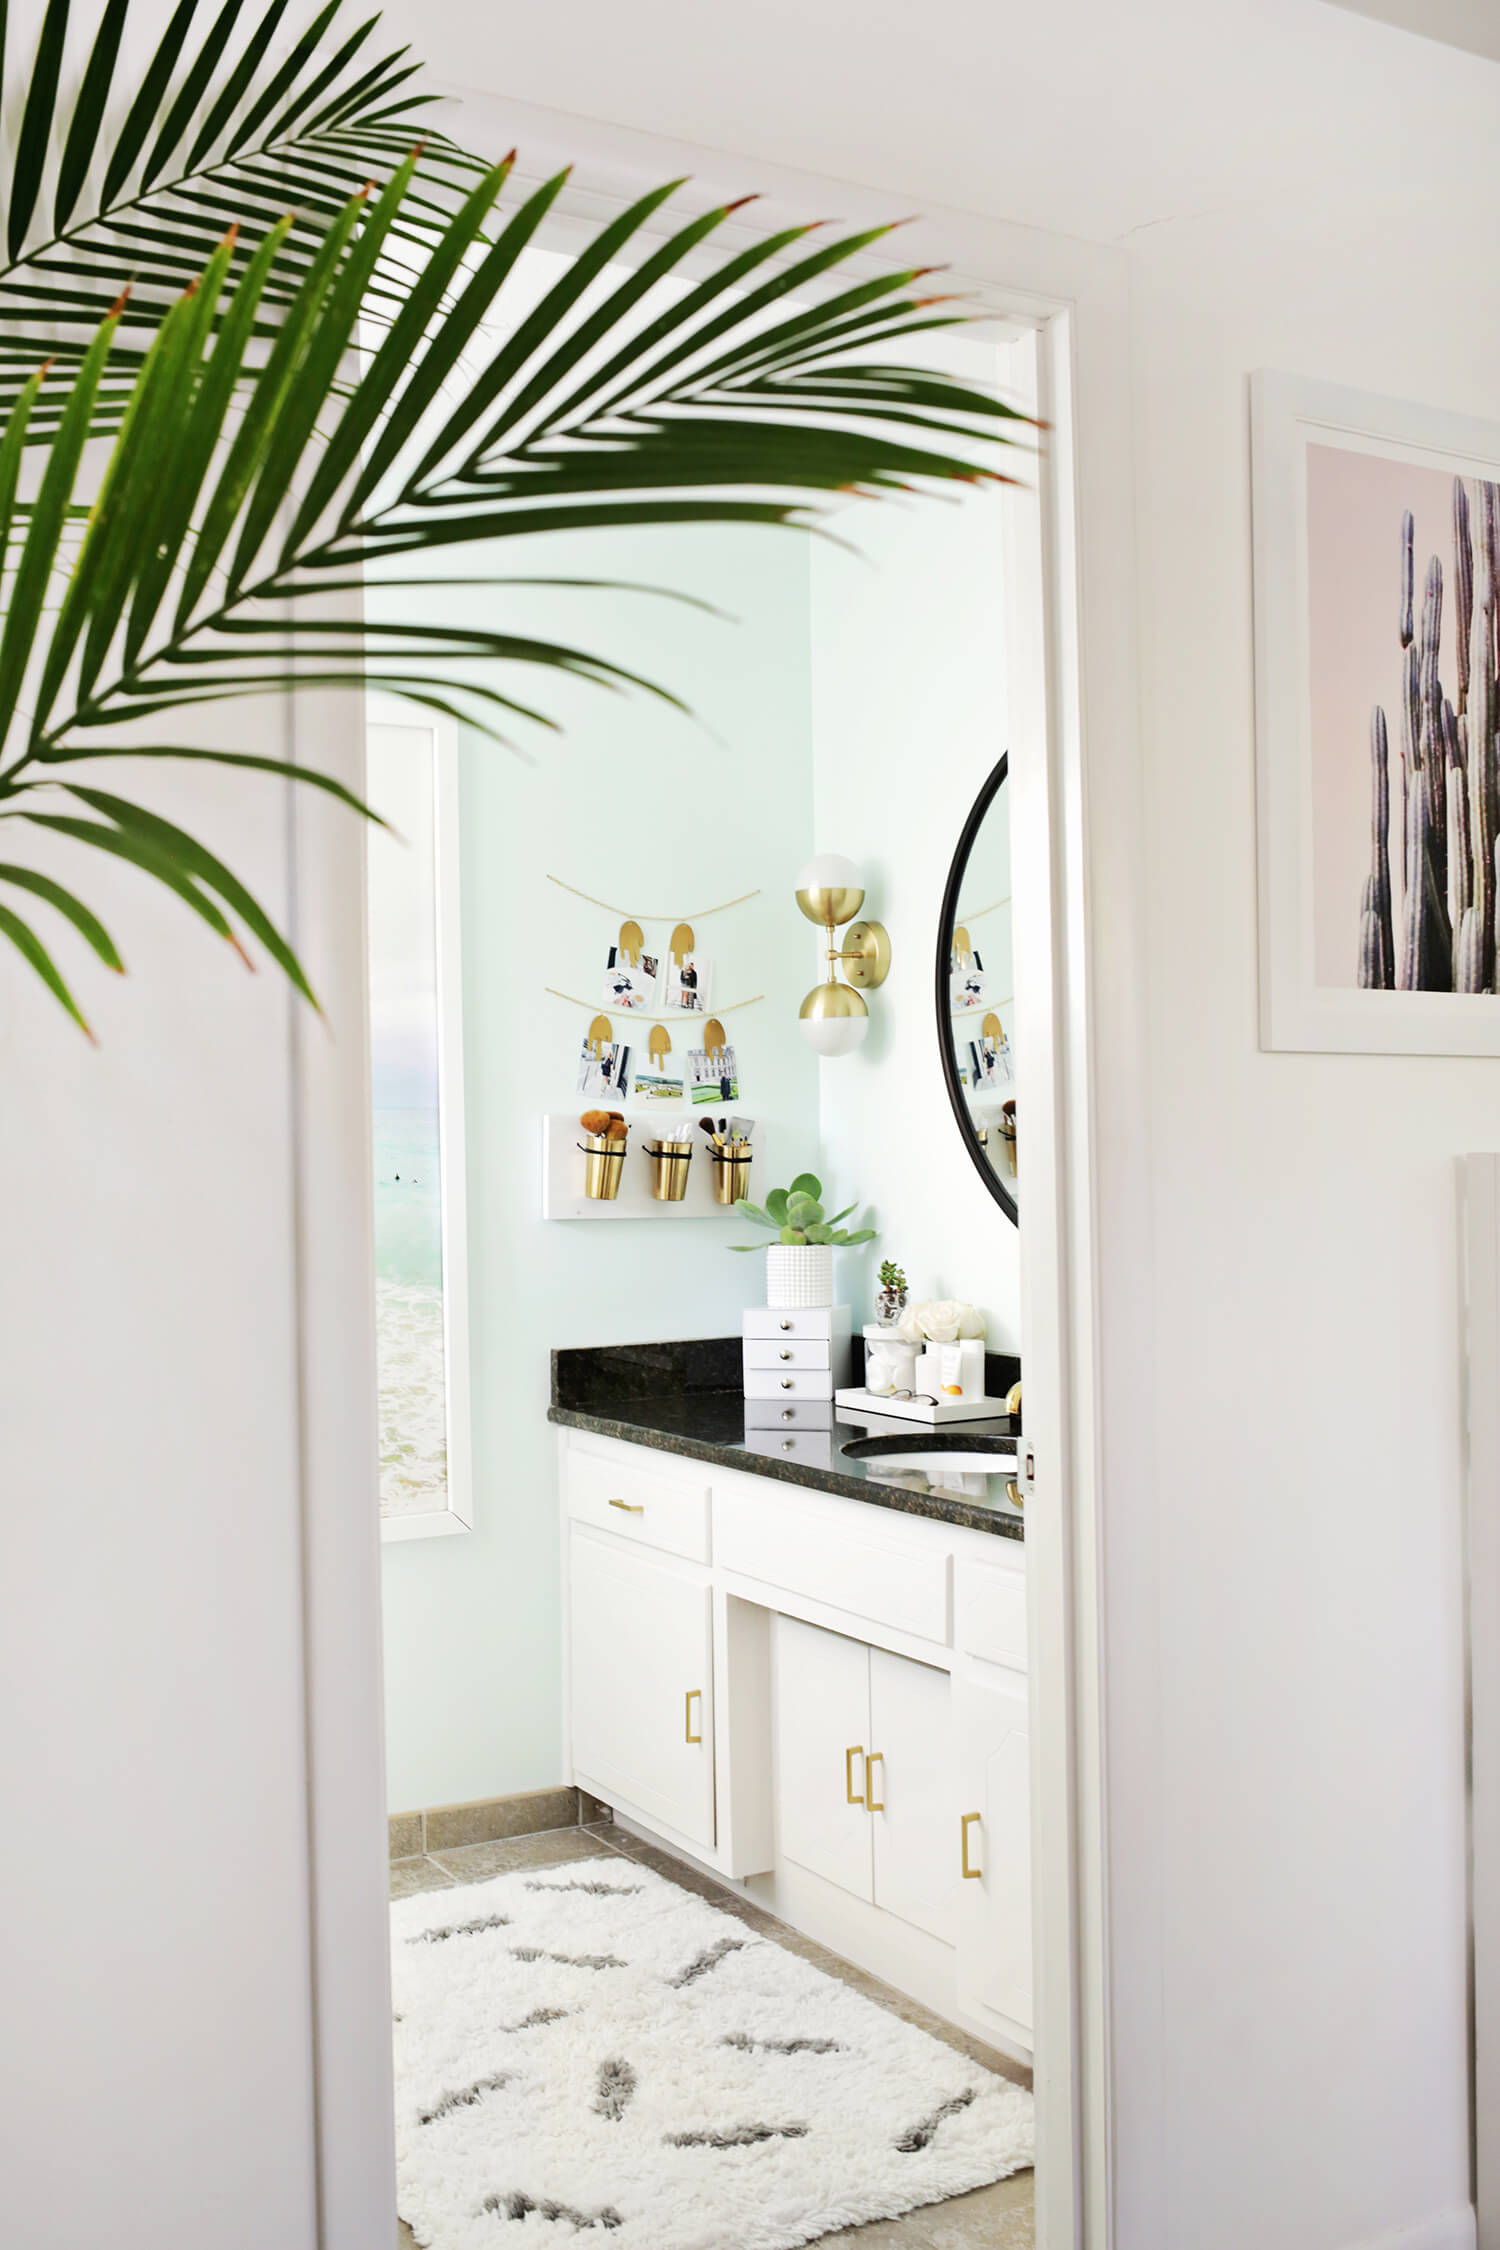 Laura's Master Bathroom Before + After! (click through to see more)